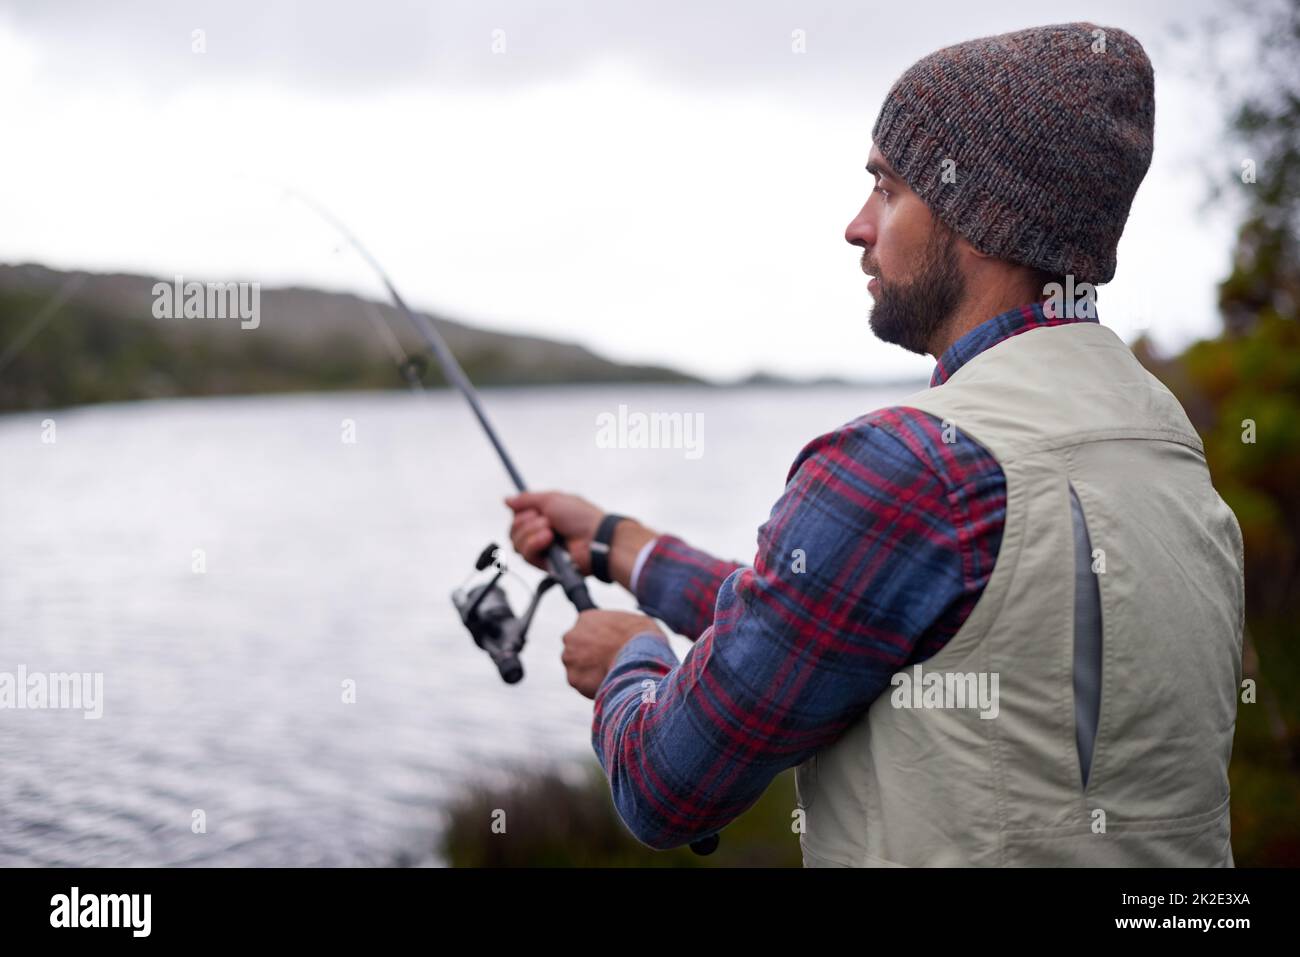 Waiting for the fish to bite. Shot of a handsome man fishing at a natural lake. Stock Photo